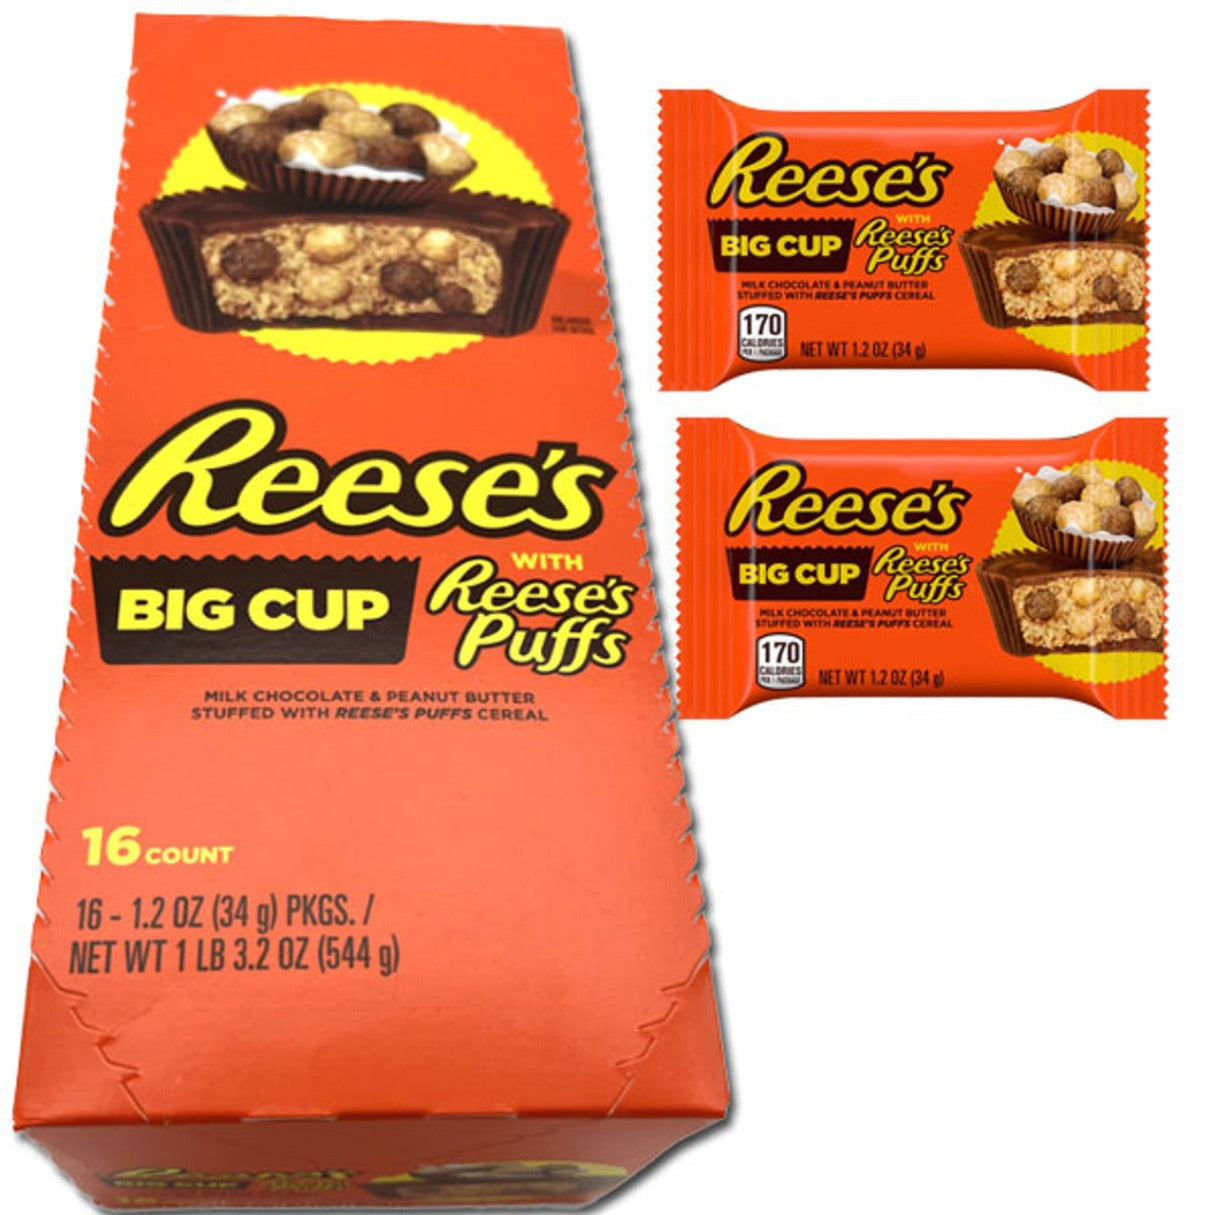 Reese's Big Cup Peanut Butter Puffs 1.2oz - 18ct